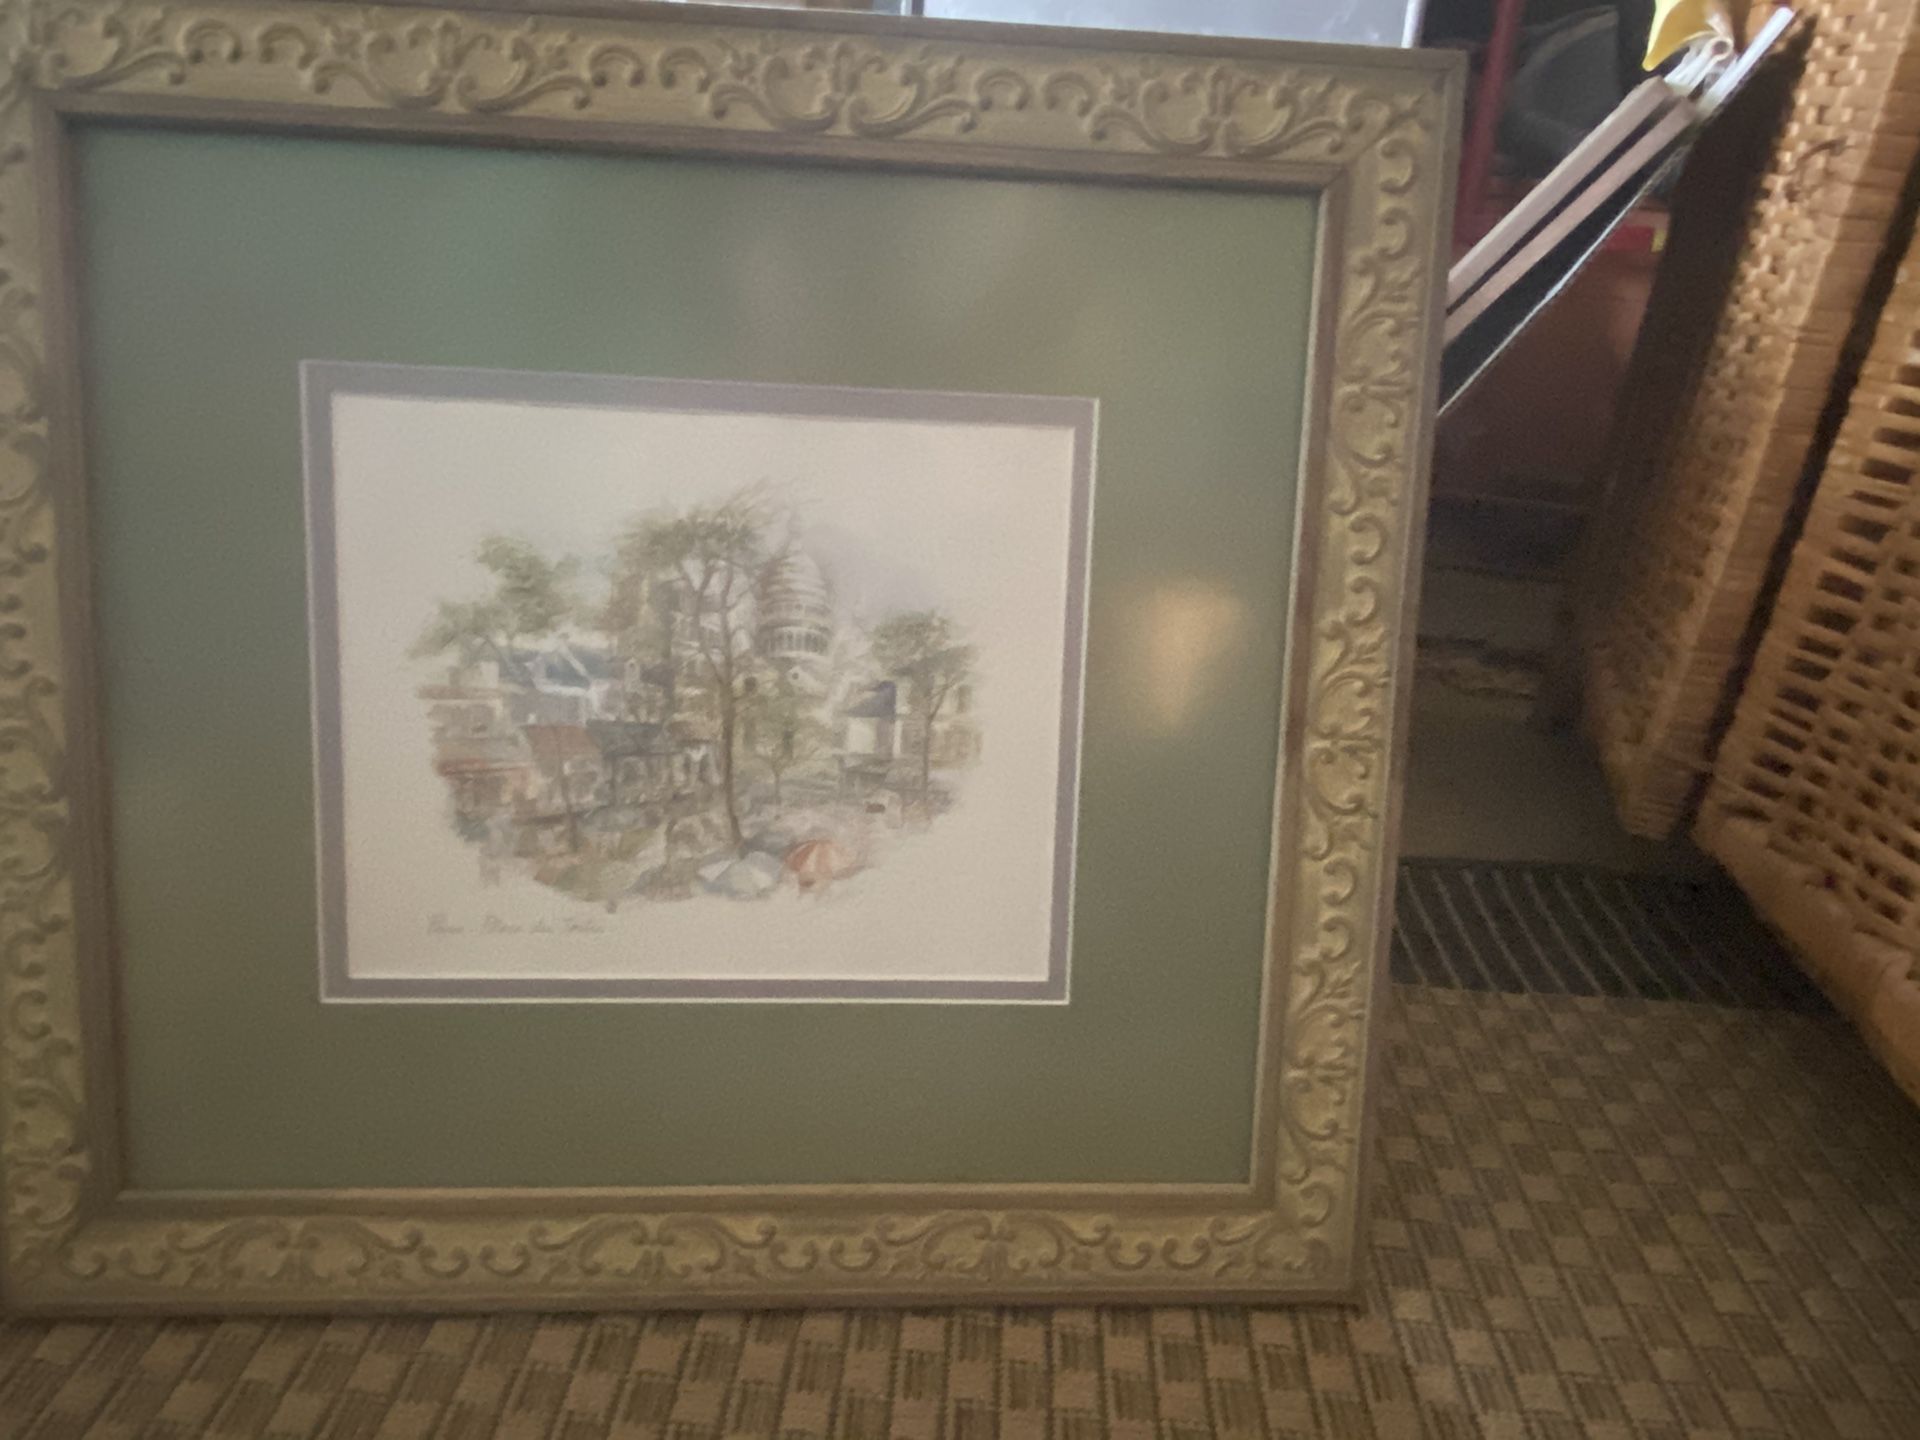 Paris Cafe- Professional Framed Signed Print $10 pick up 107th Ave and Camelback road